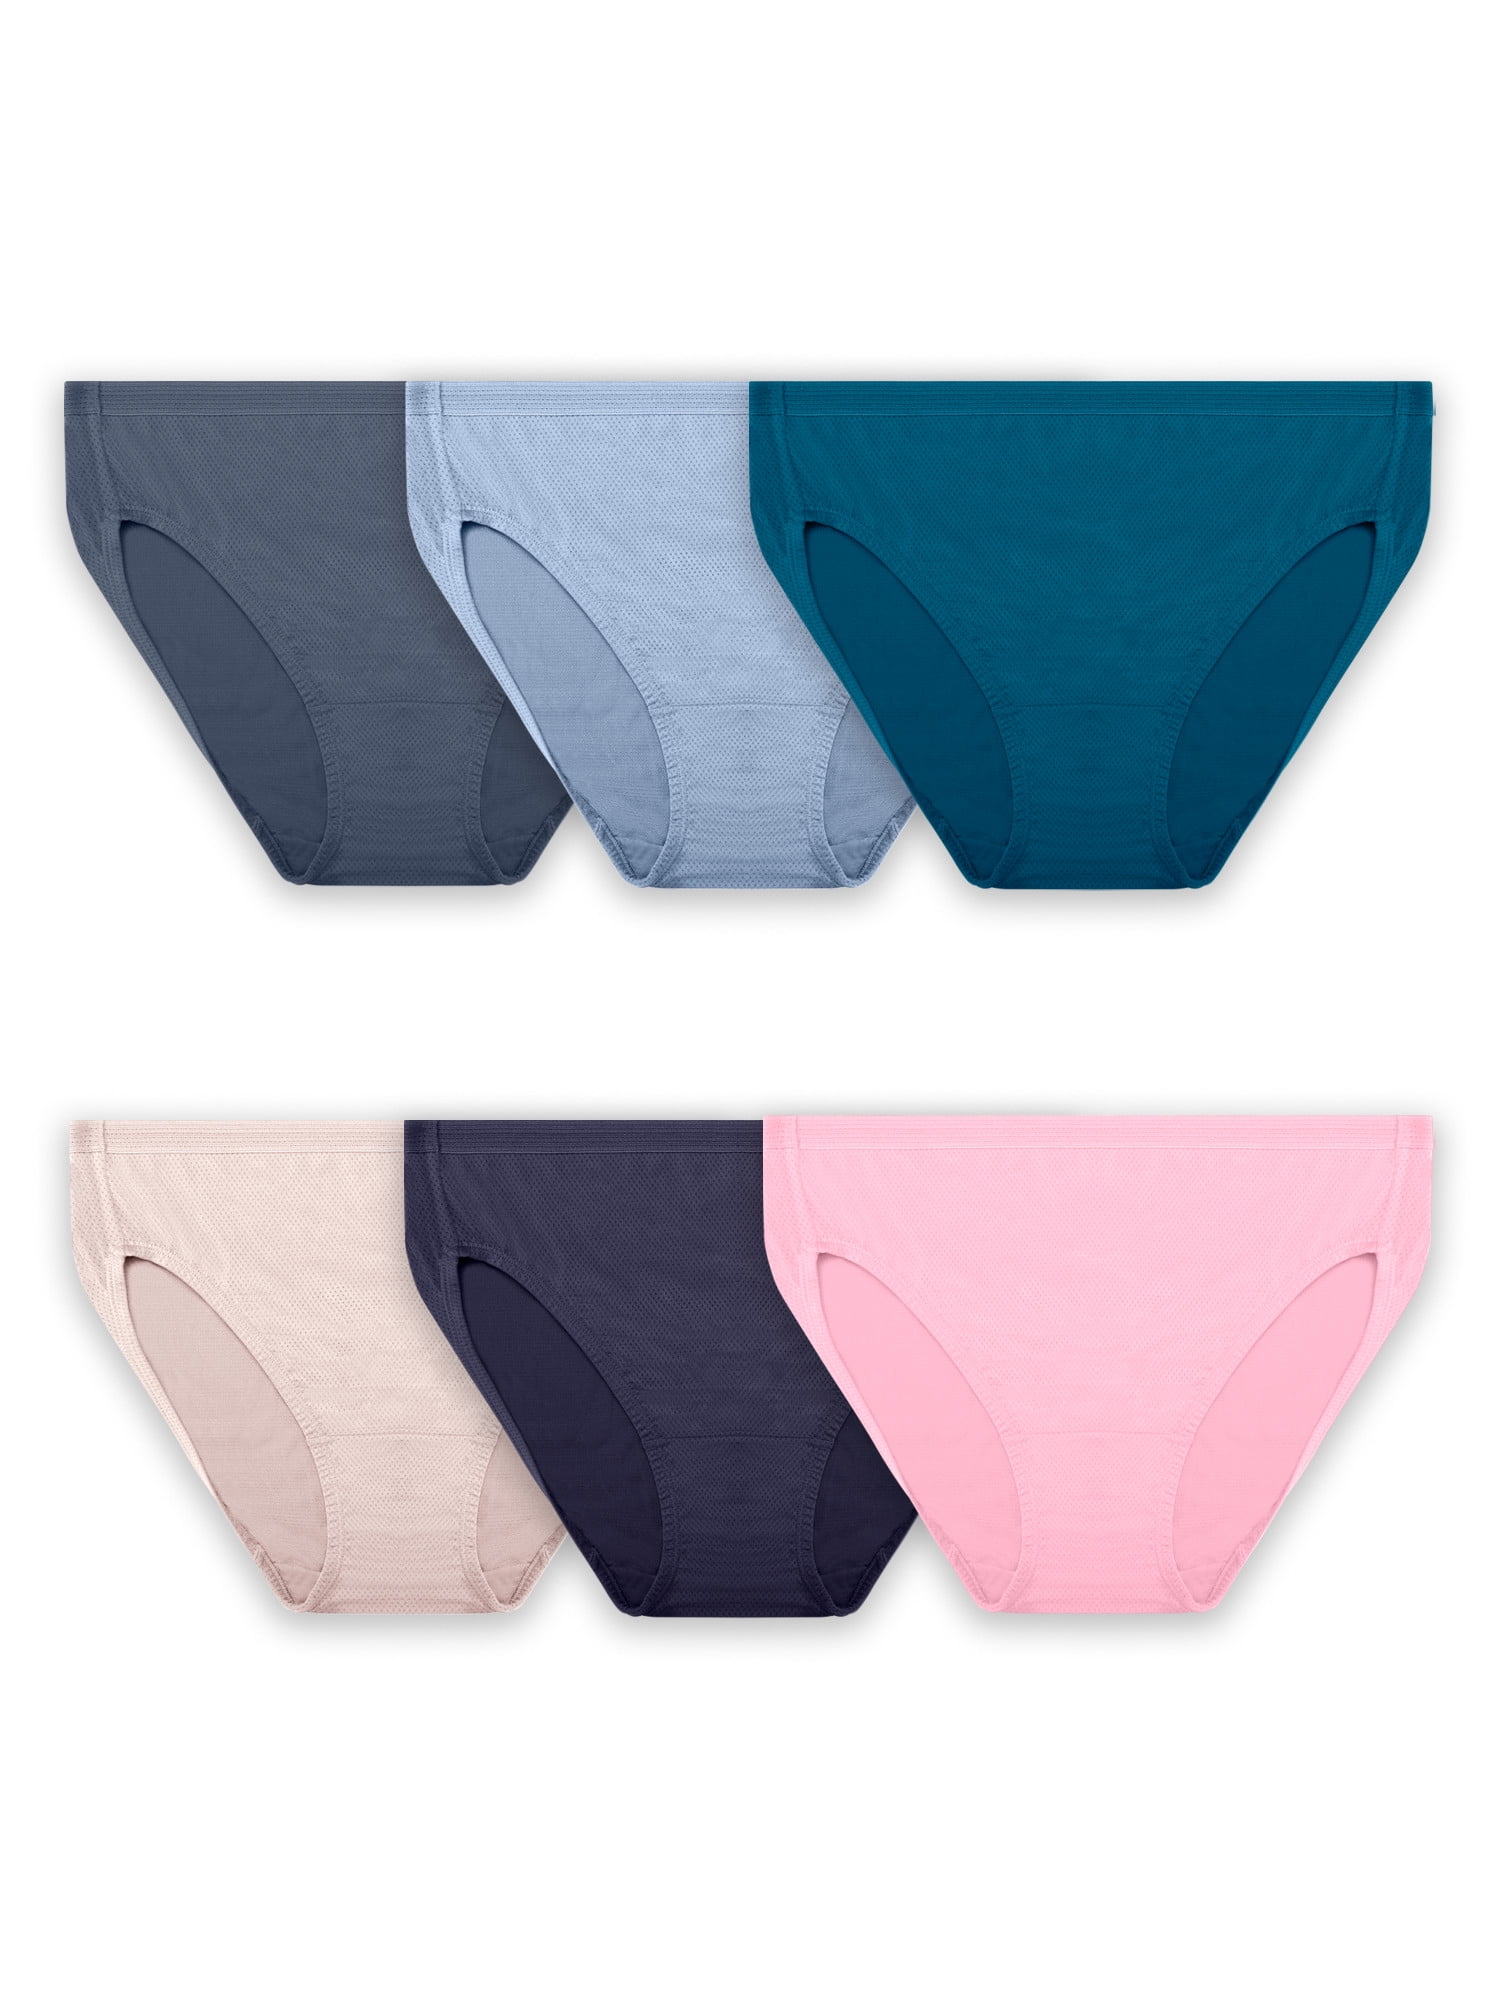 Fit for Me by Fruit of the Loom Women's Plus Cotton White Brief Panties - 5  Pack